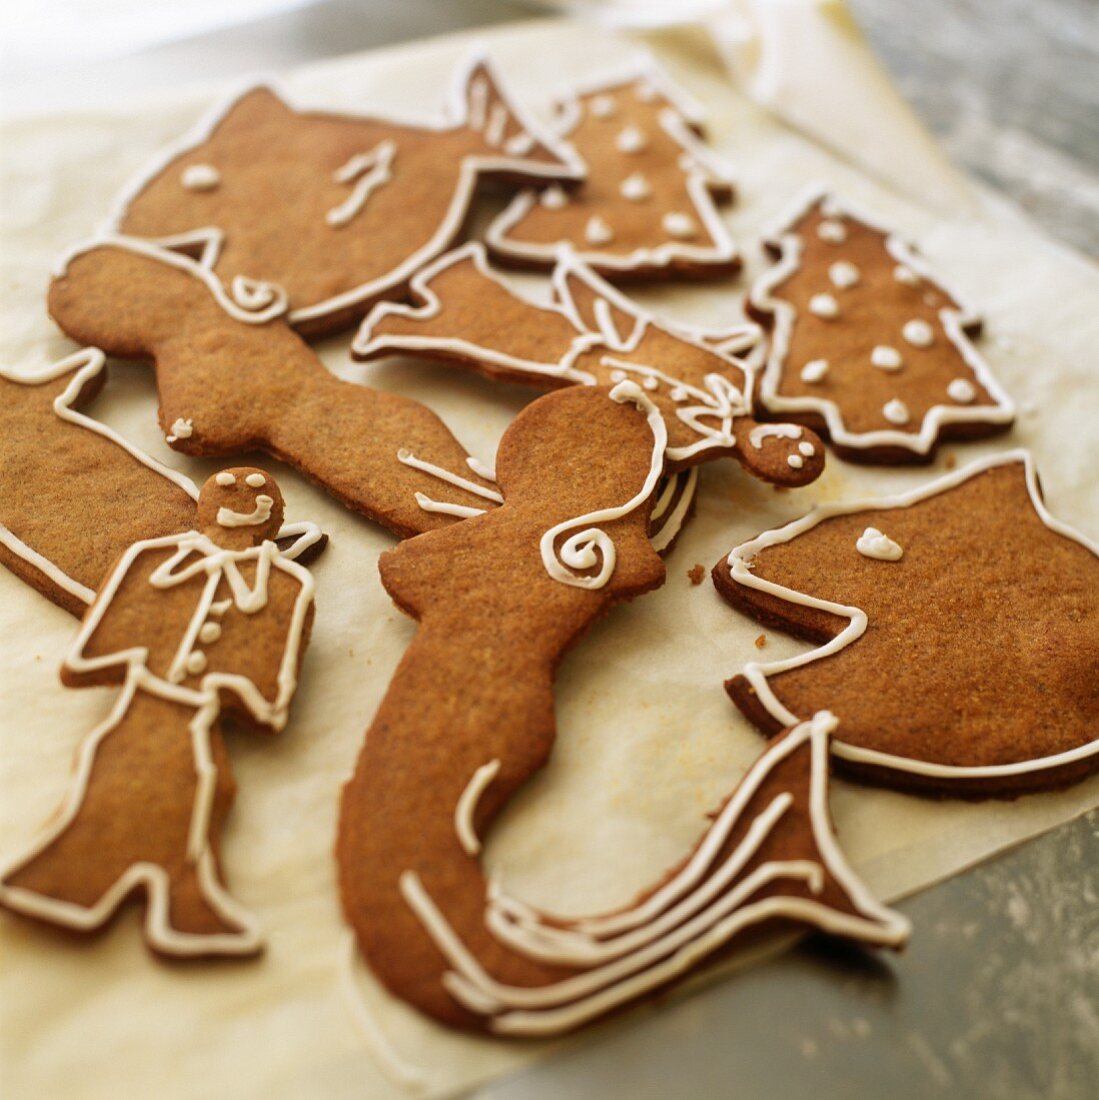 Various gingerbread shapes